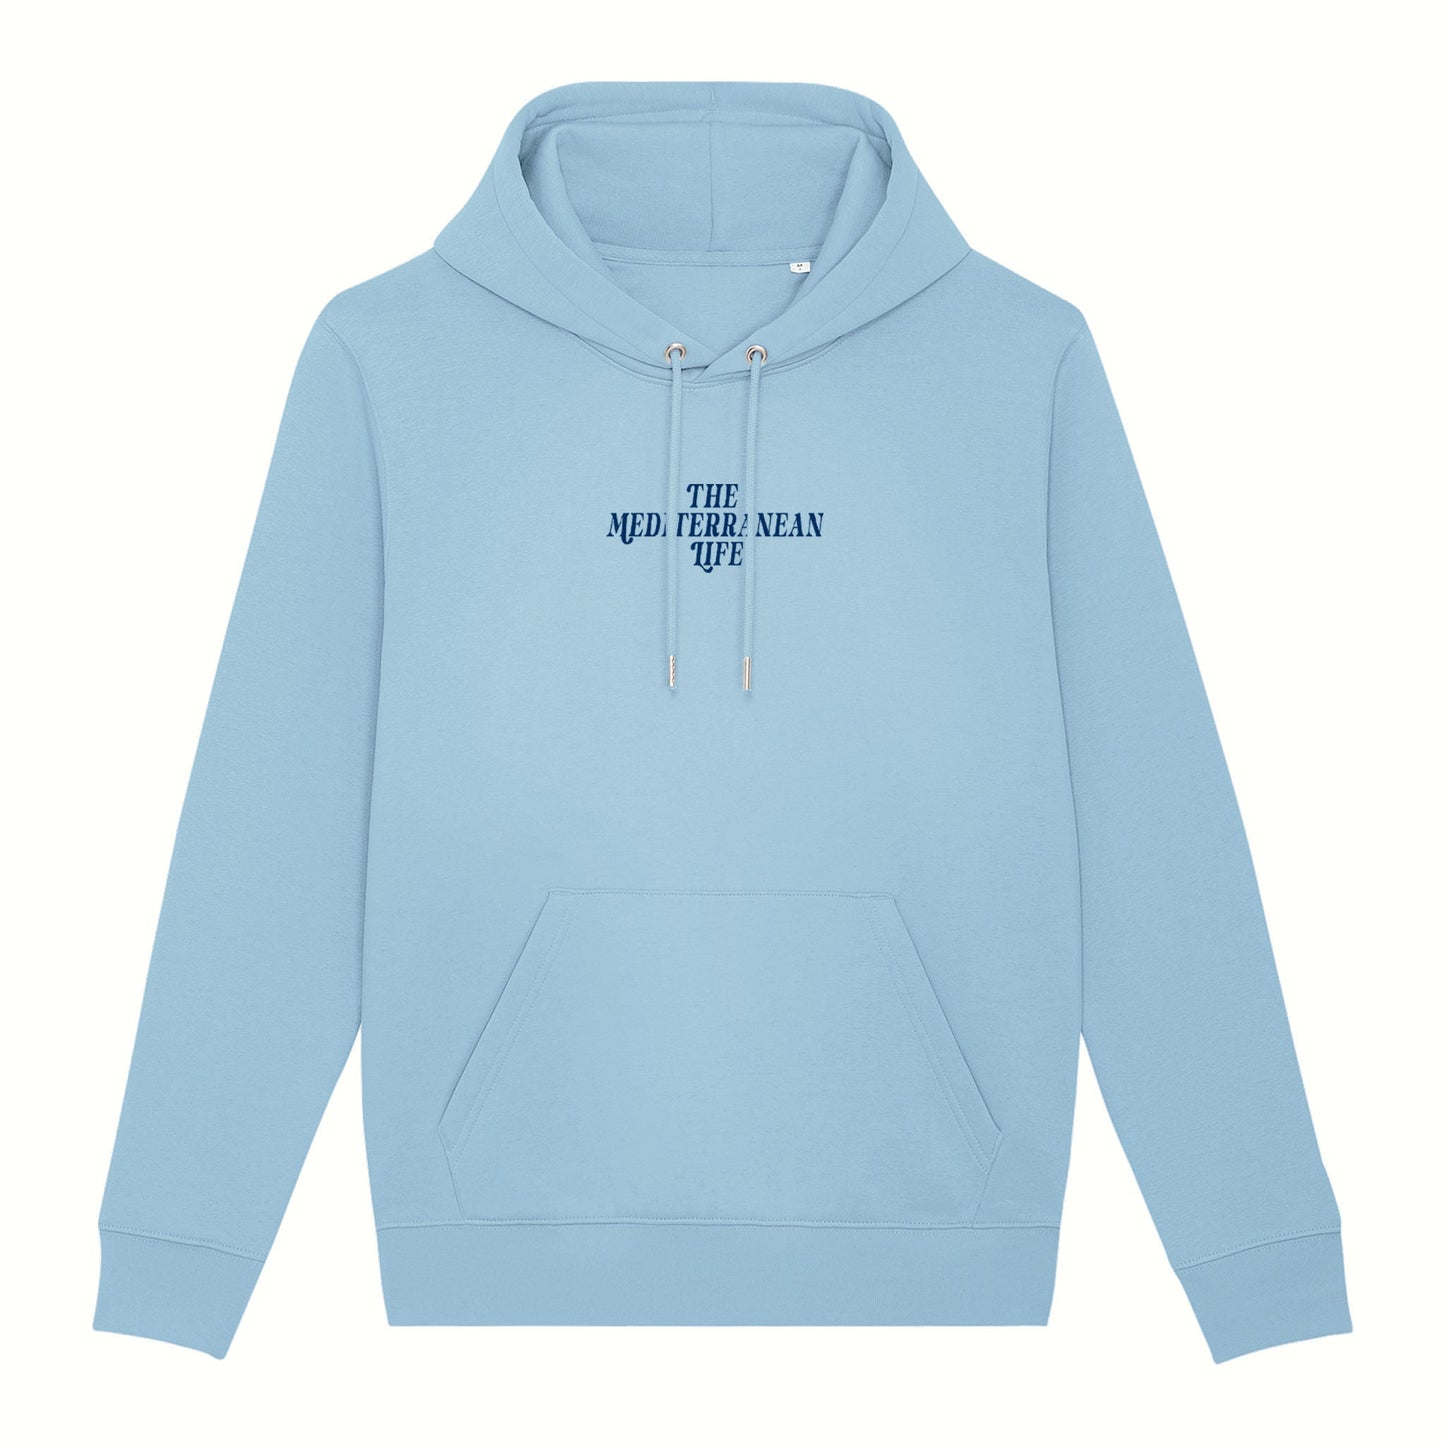 Fear the ordinary sky blue premium organic cotton hoodie with cobalt blue adventure inspired front print.